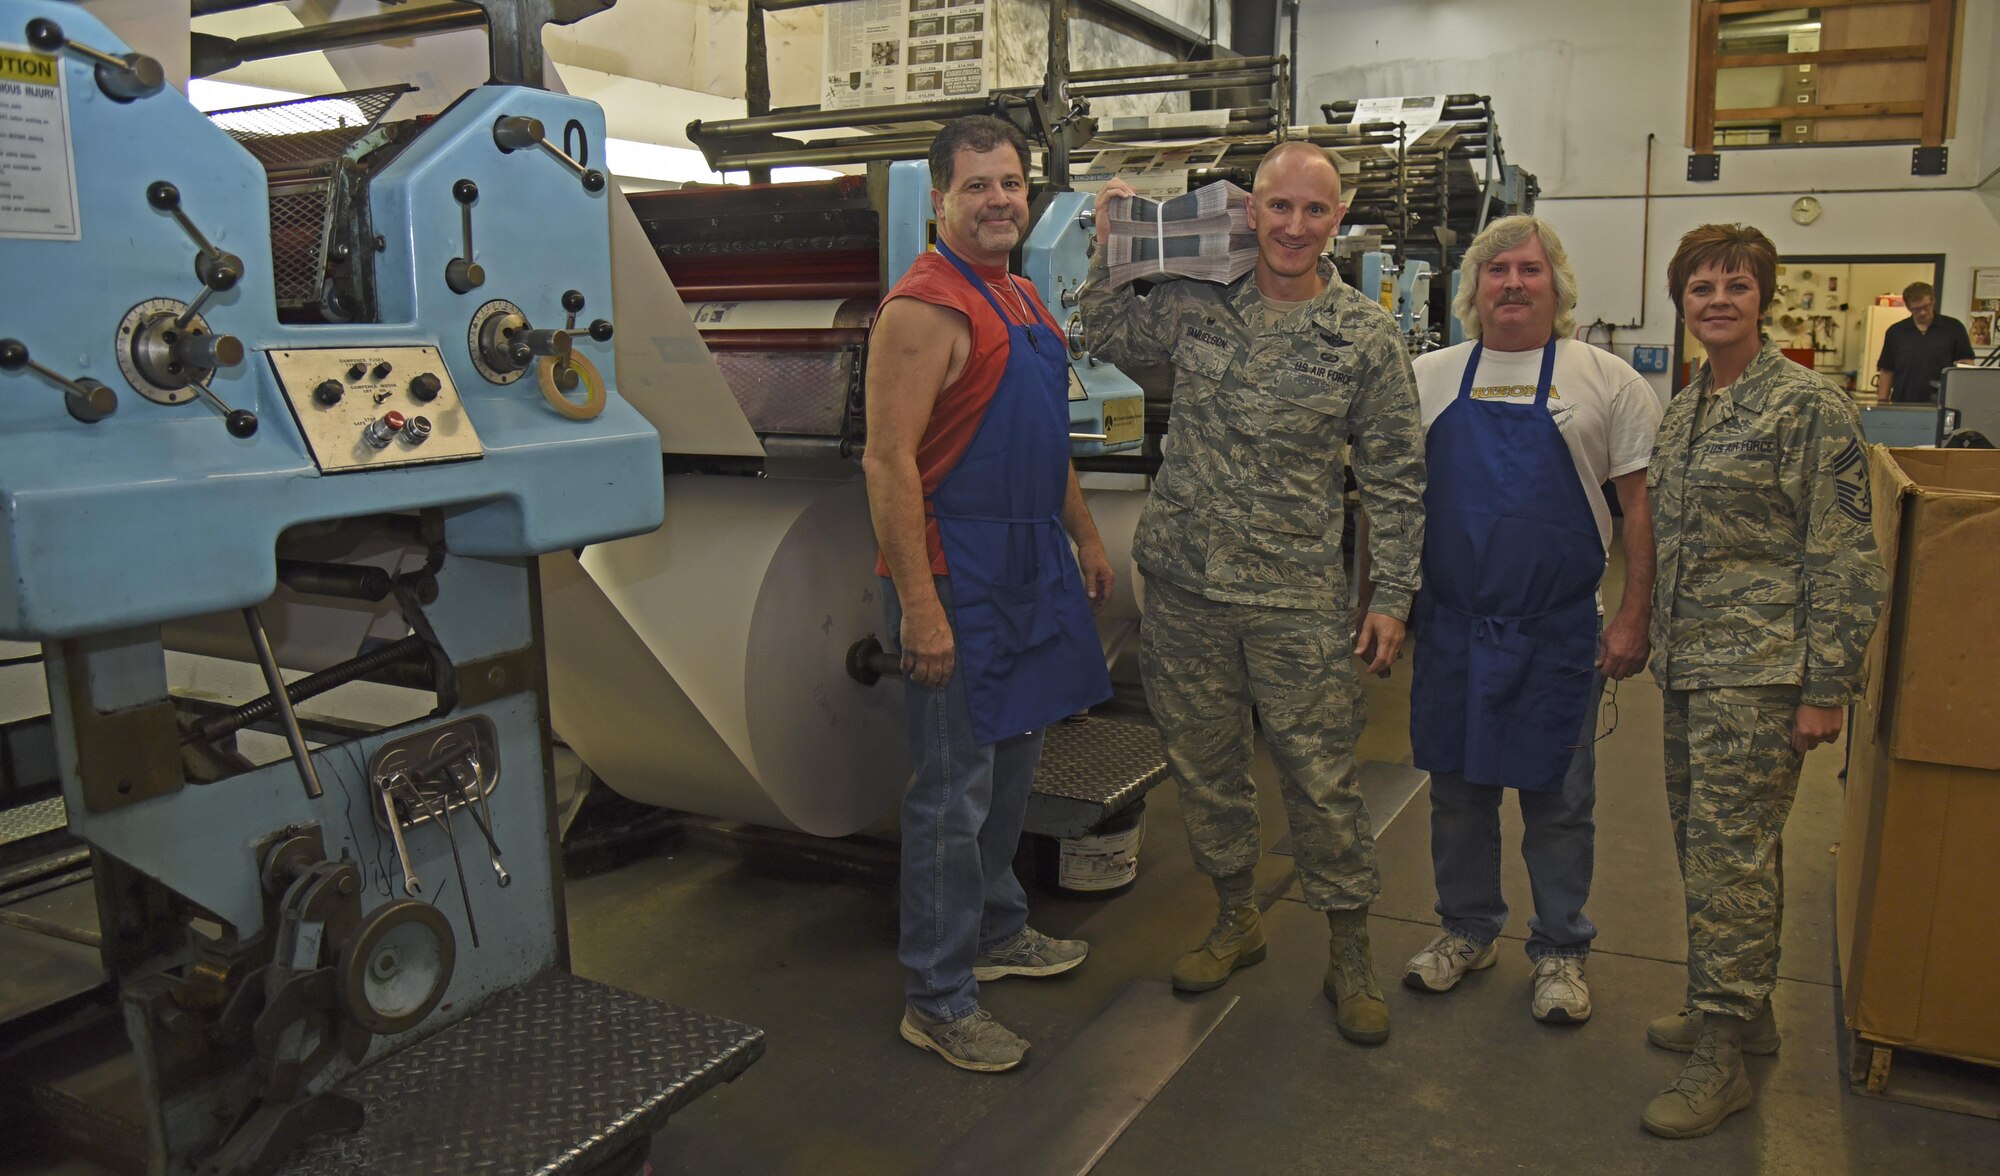 Cheney Free Press pressmen conclude the tour for Fairchild Leadership Oct. 13, 2016, at Cheney. The tour included the start to finish process of producing the Fairchild Flyer. Each newspaper is created using locally sourced newsprint, weighing in at nearly 800 pounds when on the roll. (U.S. Air Force photo/Senior Airman Mackenzie Richardson)